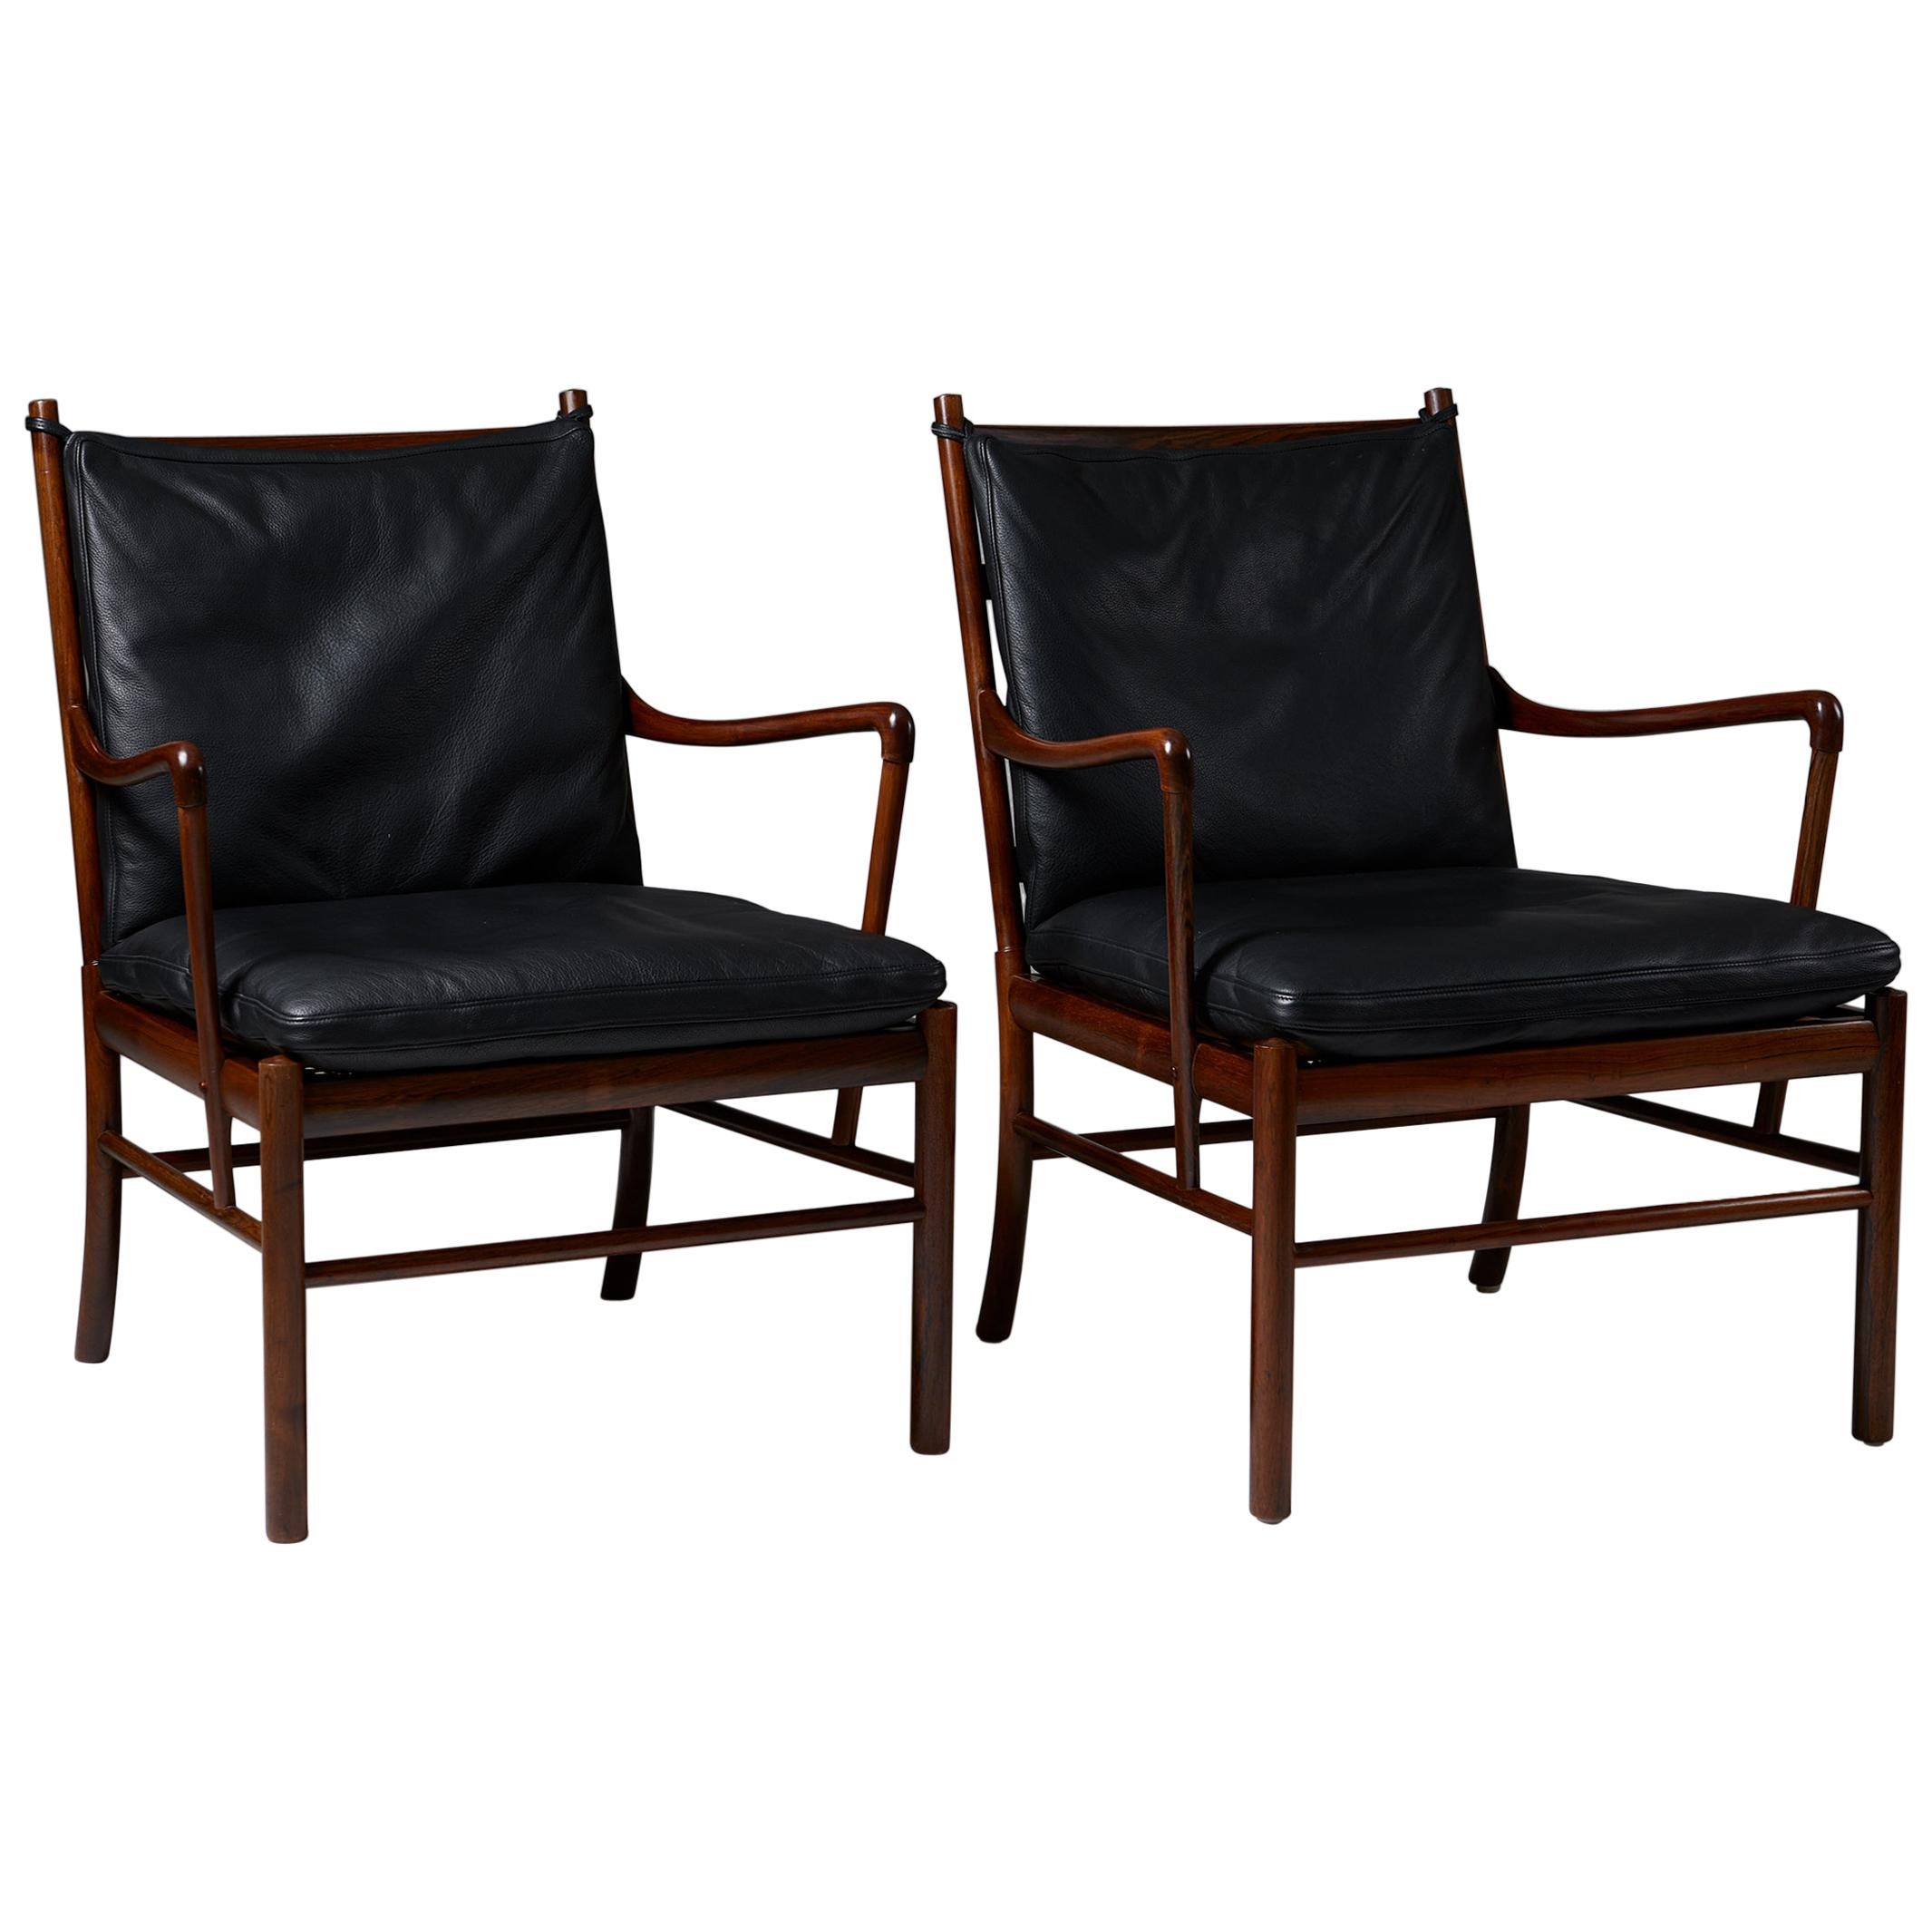 Pair of Colonial Chairs Model PJ 149 Designed by Ole Wanscher for Poul Jeppesen